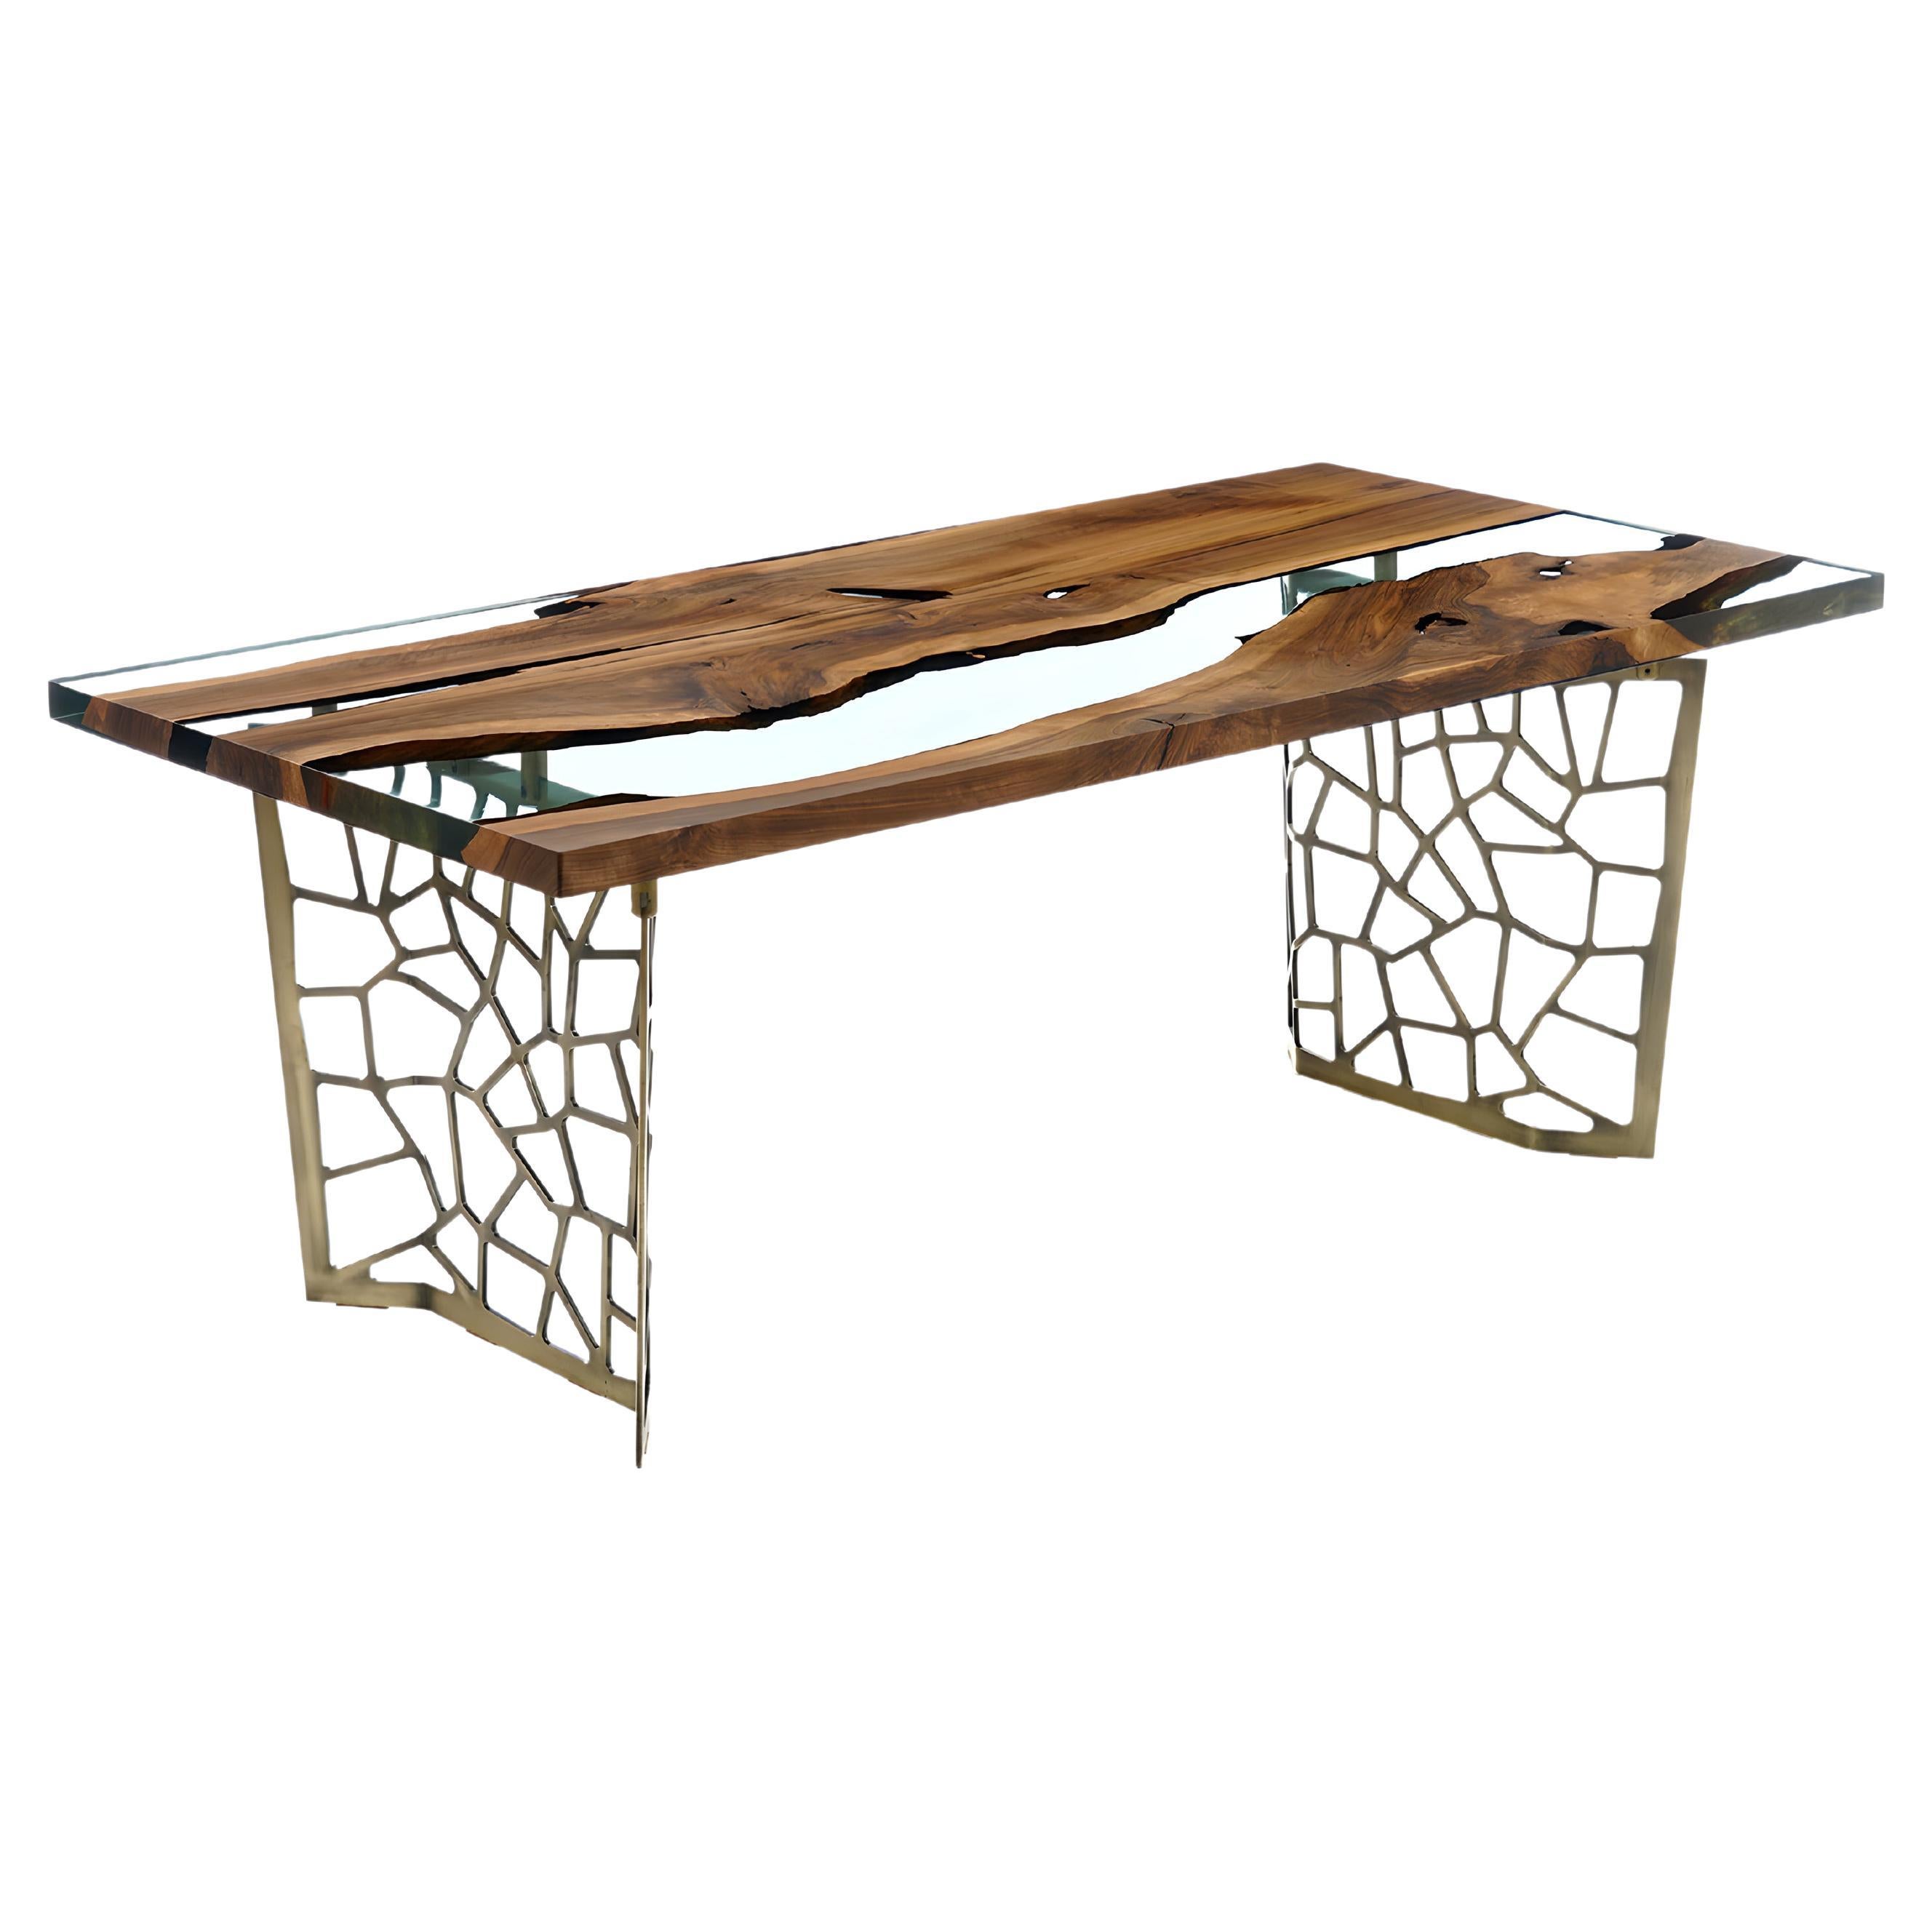 Efil Dining Table: Embedded Walnut Resin Table For Sale